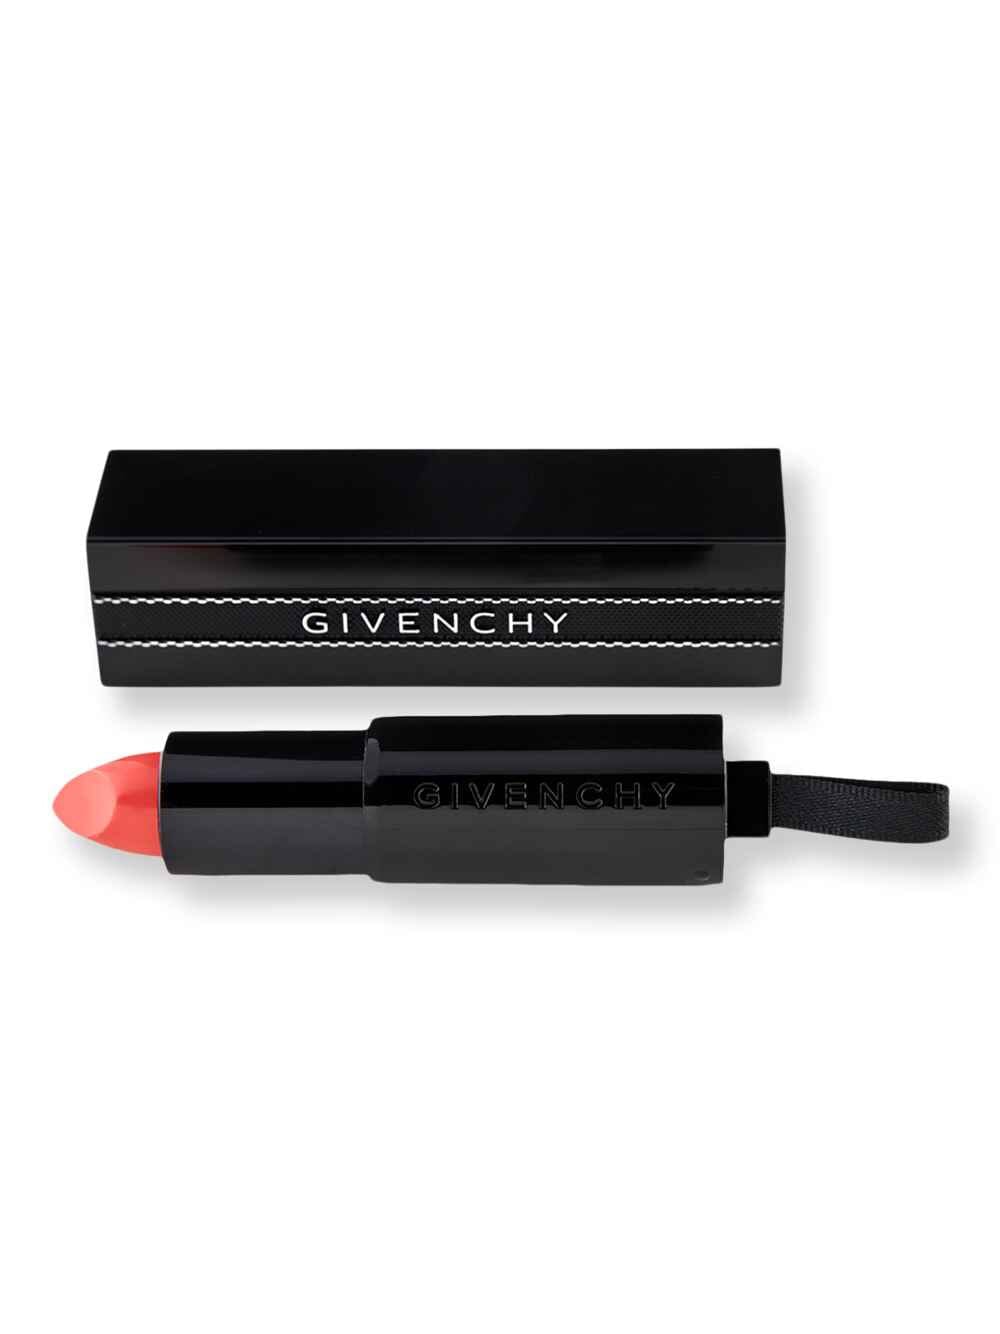 Givenchy Givenchy Rouge Interdit Illicit Color .12 oz3.4 g17 Flash Coral Lipstick, Lip Gloss, & Lip Liners 